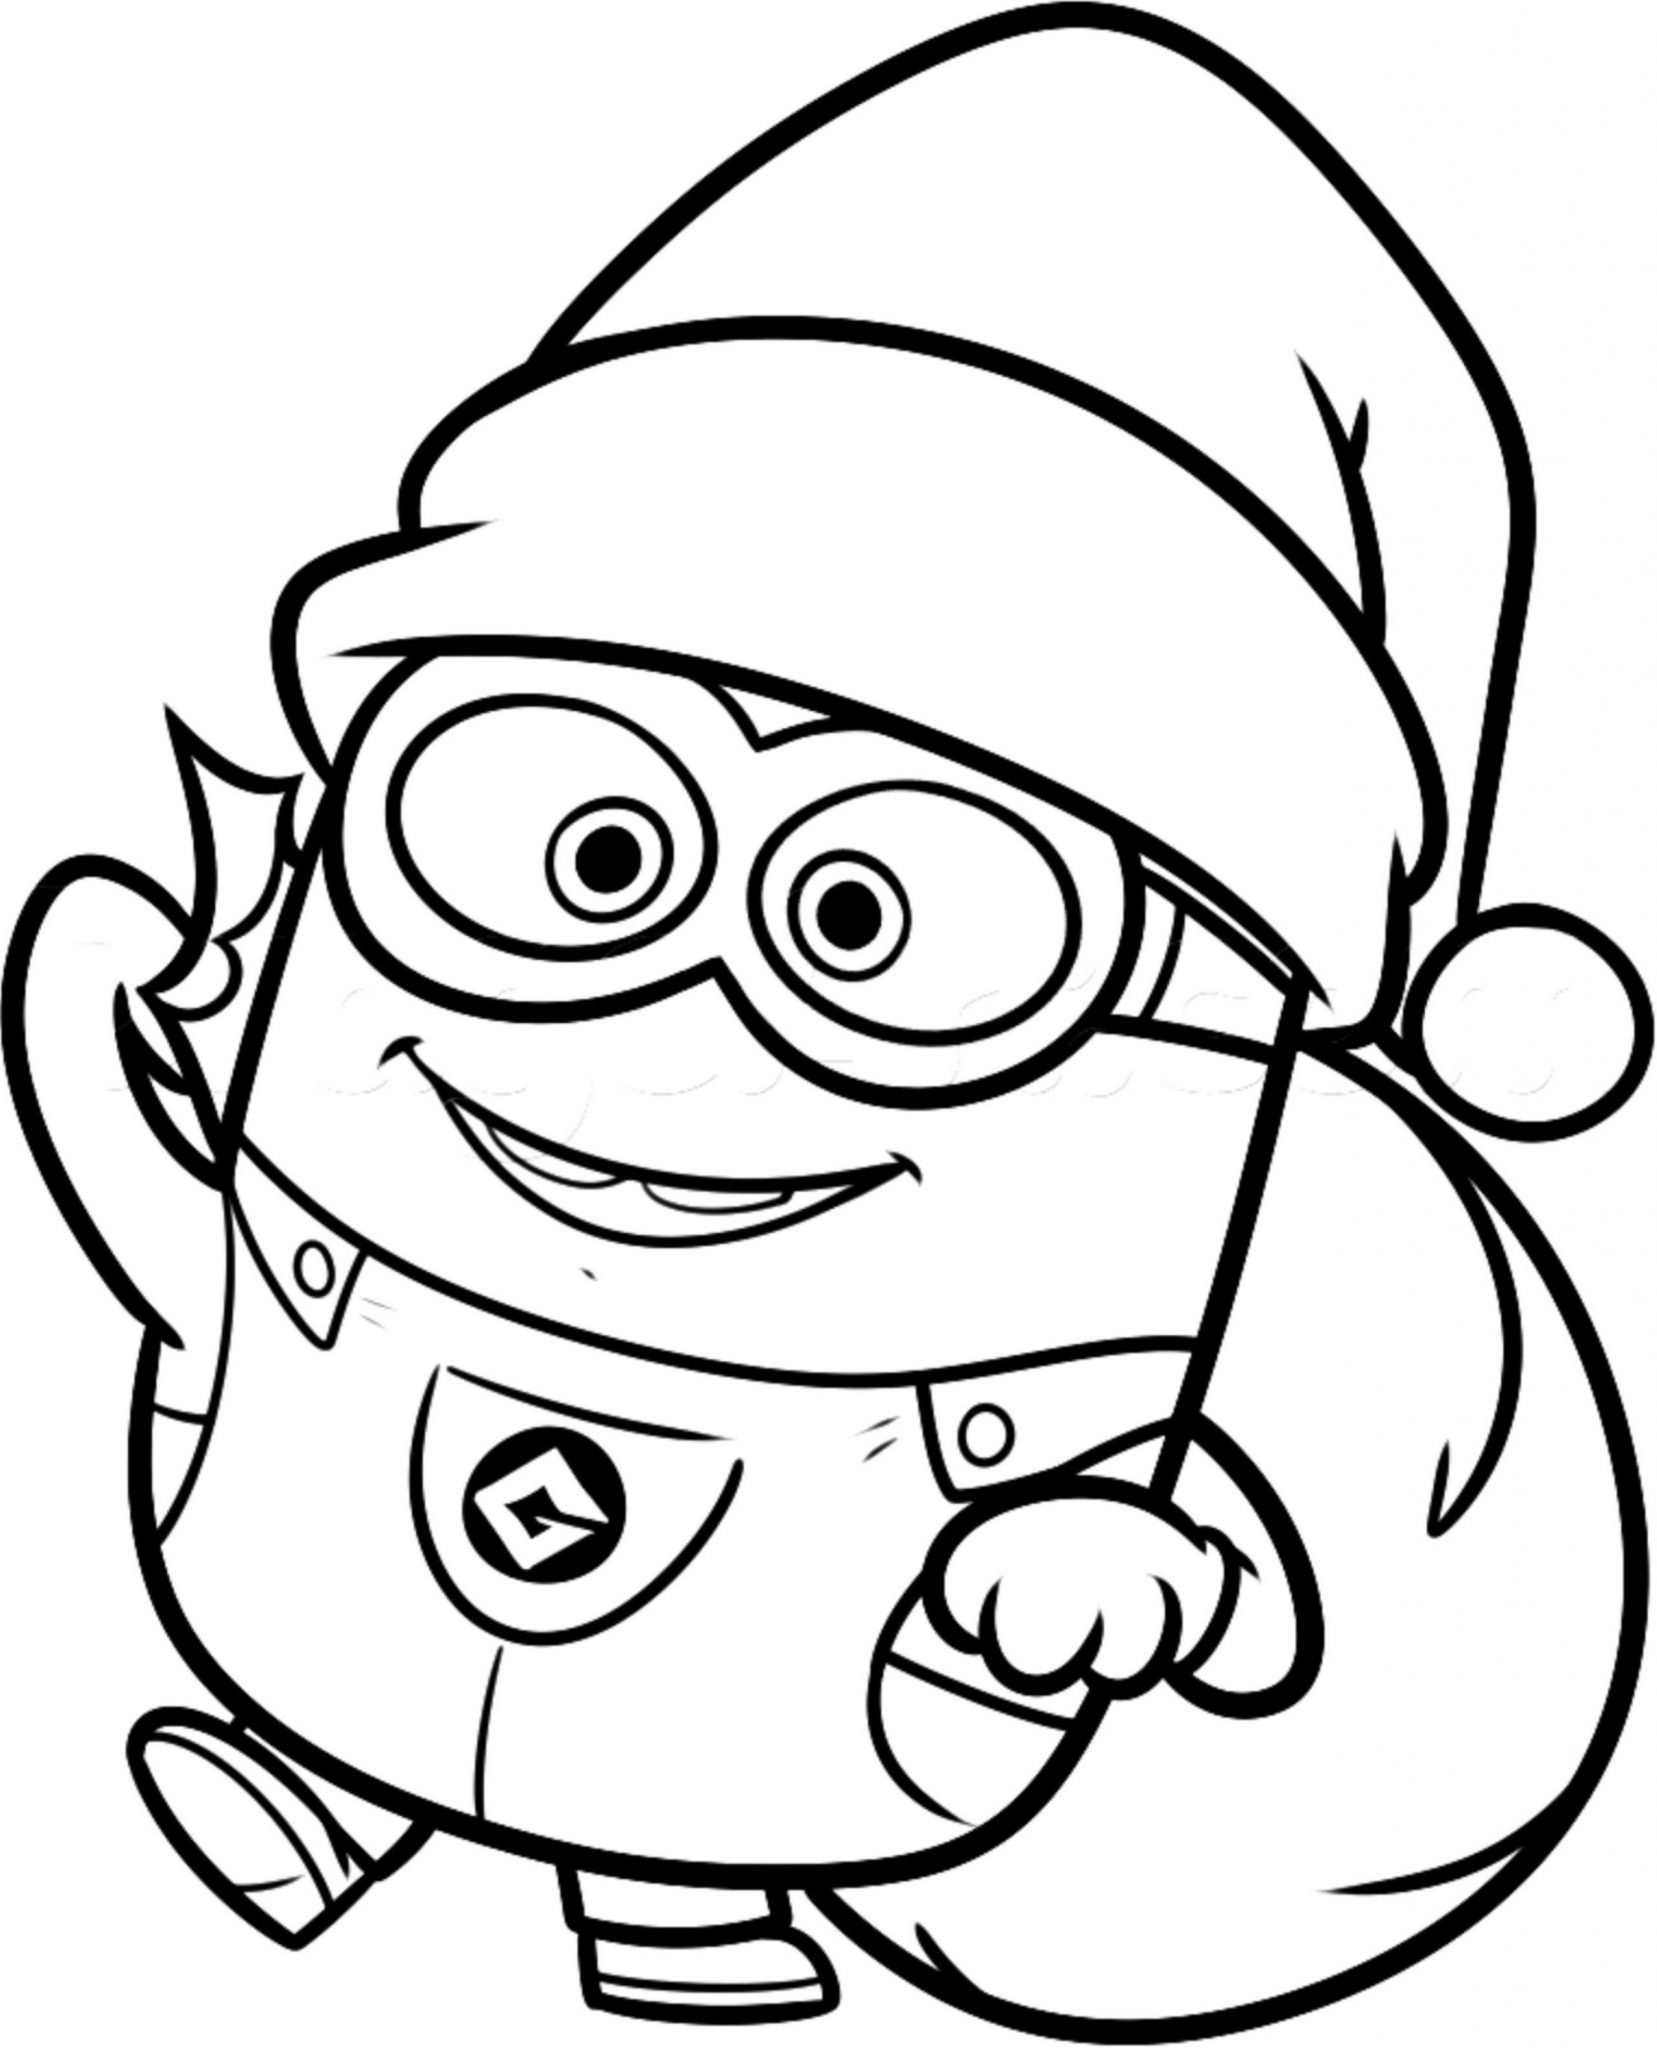 coloring pictures of minions fun learn free worksheets for kid minions free pictures of coloring minions 